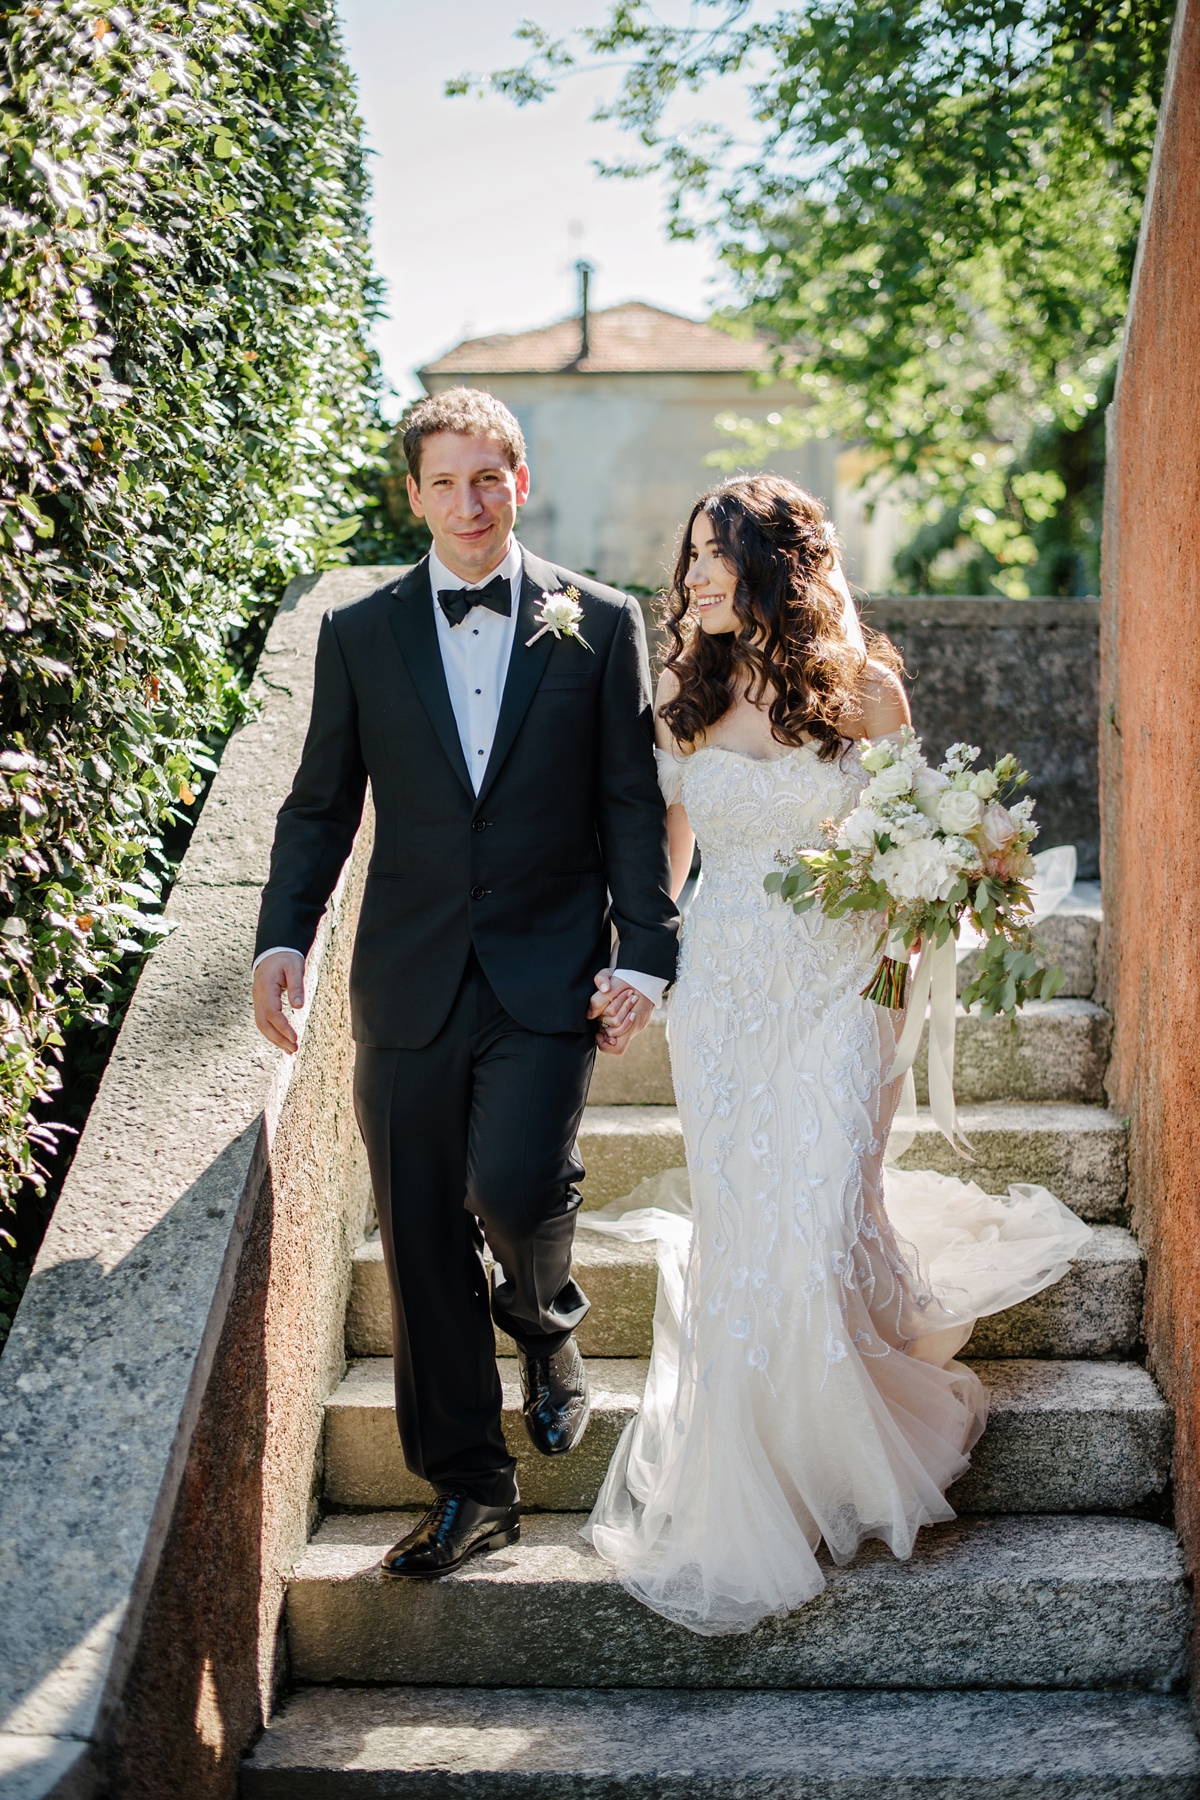 34 A Monique Lhuillier gown for a romantic summer villa wedding on Lake Como in Italy